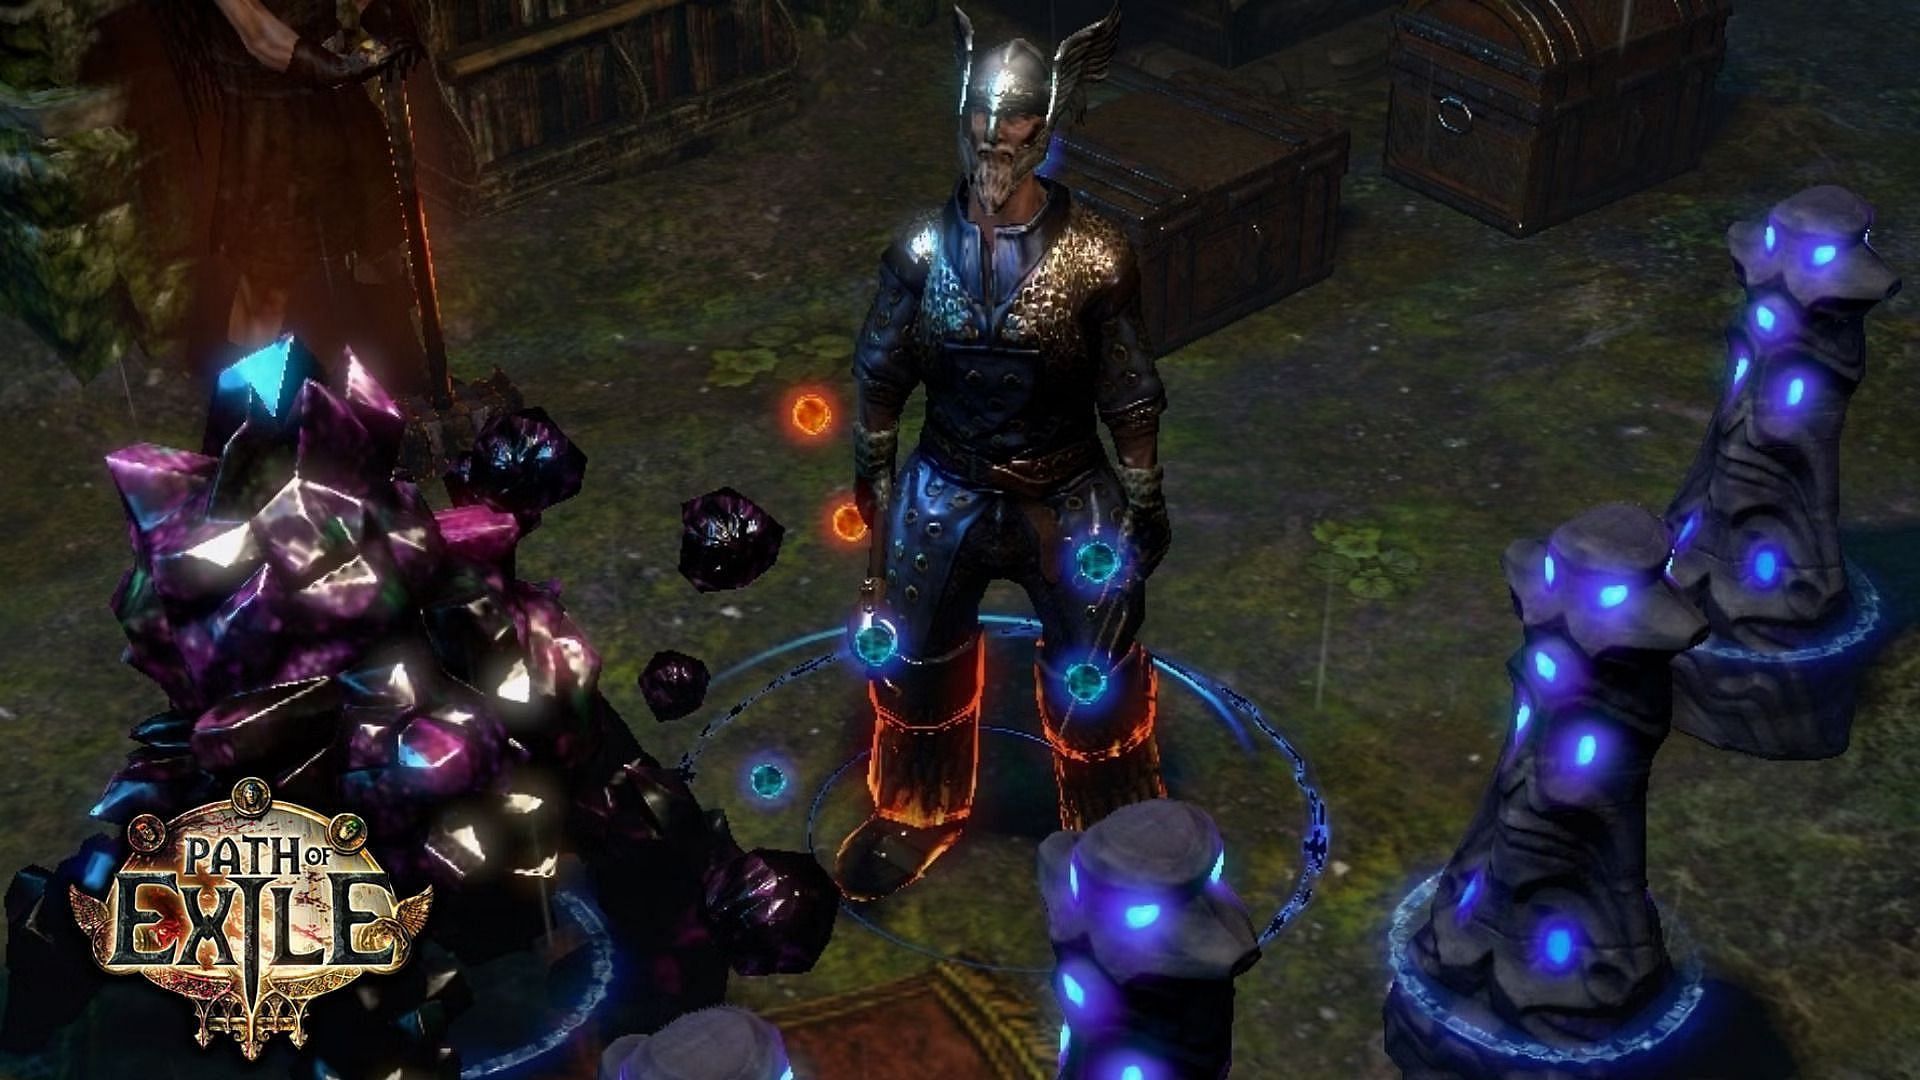 Arc Totem Hierophant build allows you to clear large mobs easily. (Image via Grinding Gear Games)